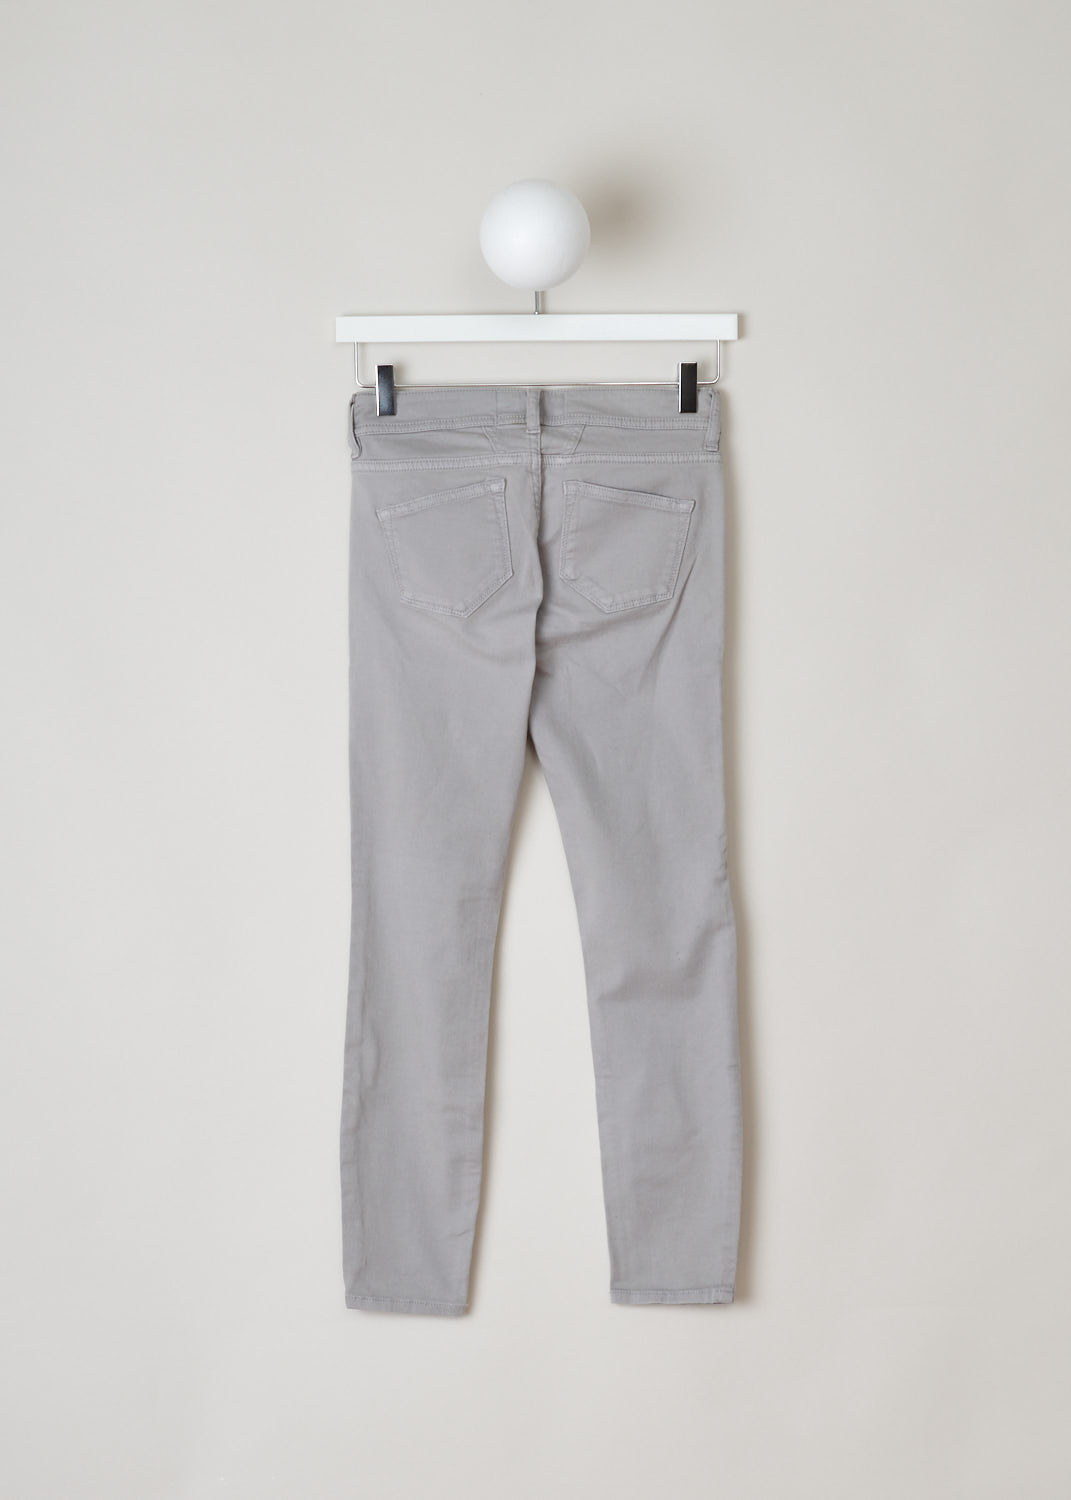 Closed, Grey colored jeans, baker_C91833_07N_3L_124, grey, back, Mid-waist slim-fit jeans made with cropped length, to show off any shoe you are wearing. Comes with the traditional 5 pockets and as you fastening option you get a zipper and button on the front. 